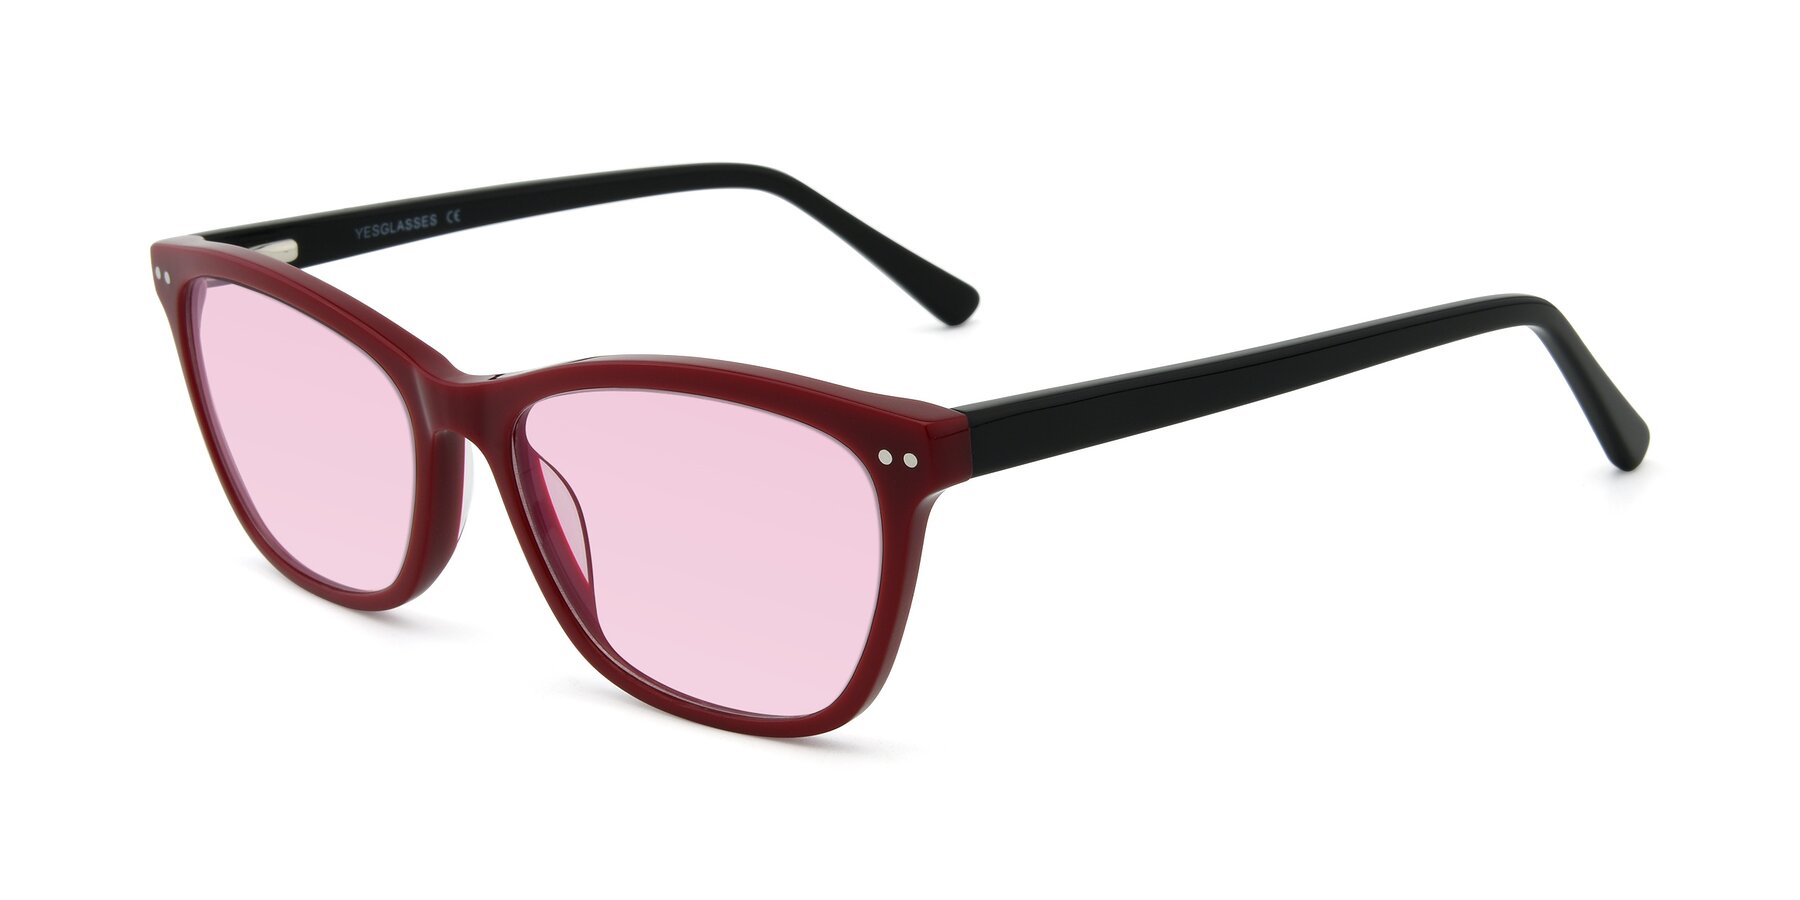 Angle of 17350 in Wine with Light Pink Tinted Lenses